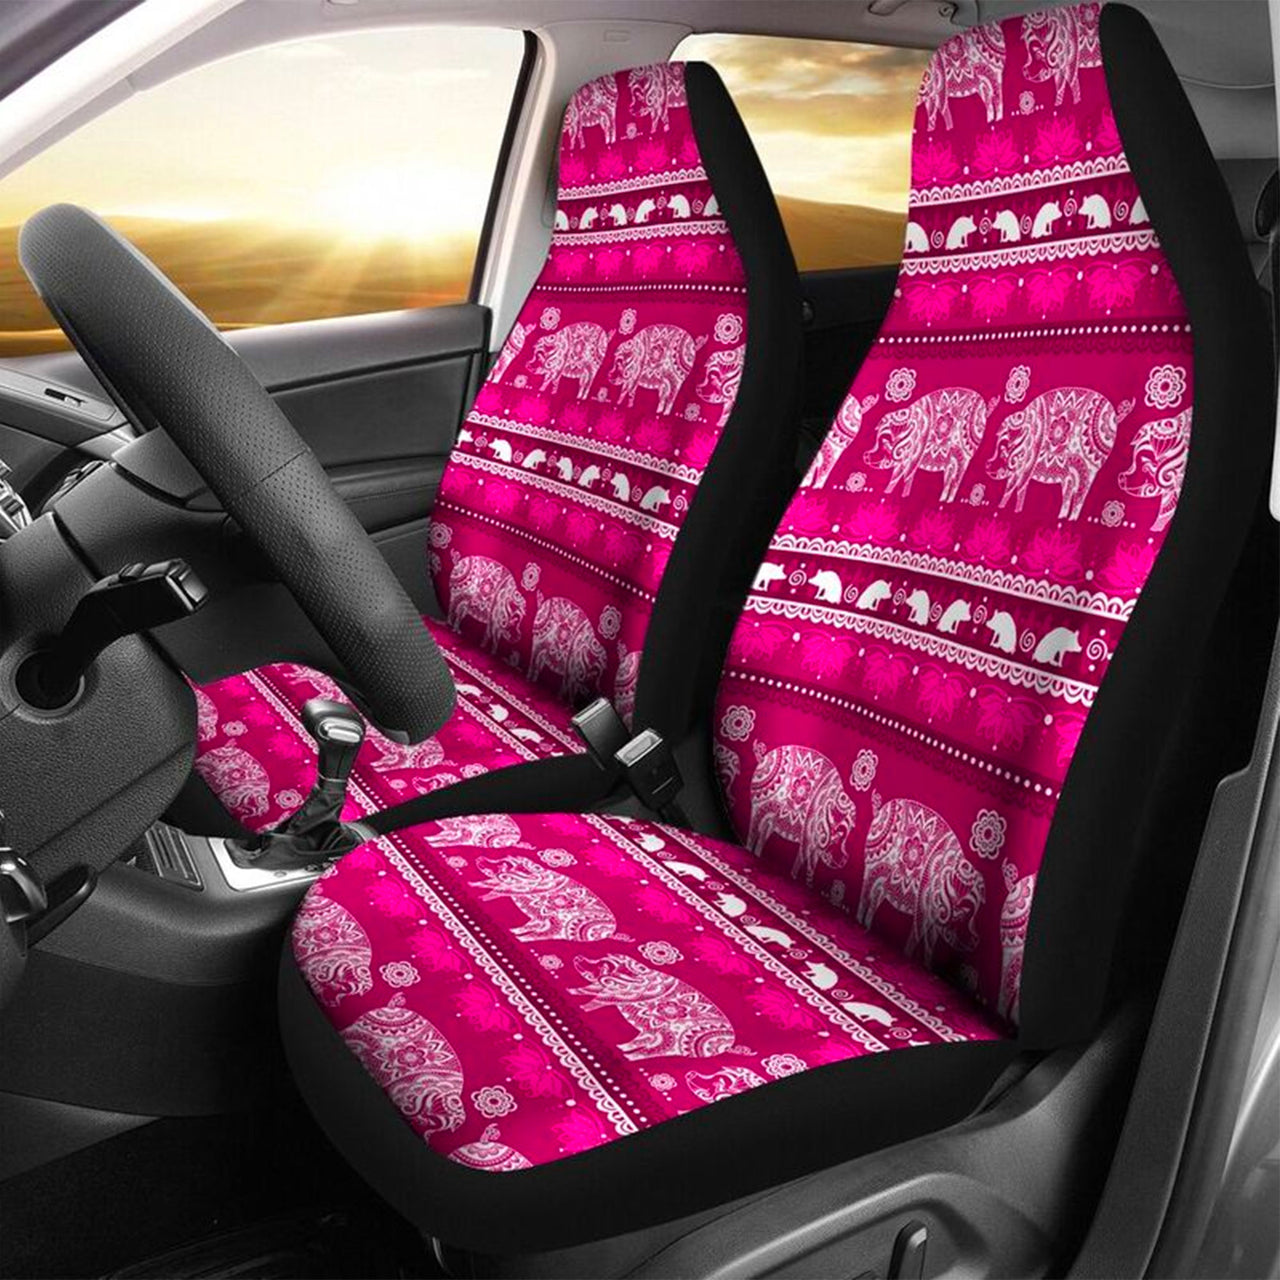 Custom Car Seat Cover Pig Watercolor Seamless Pattern Seat Covers for Cars